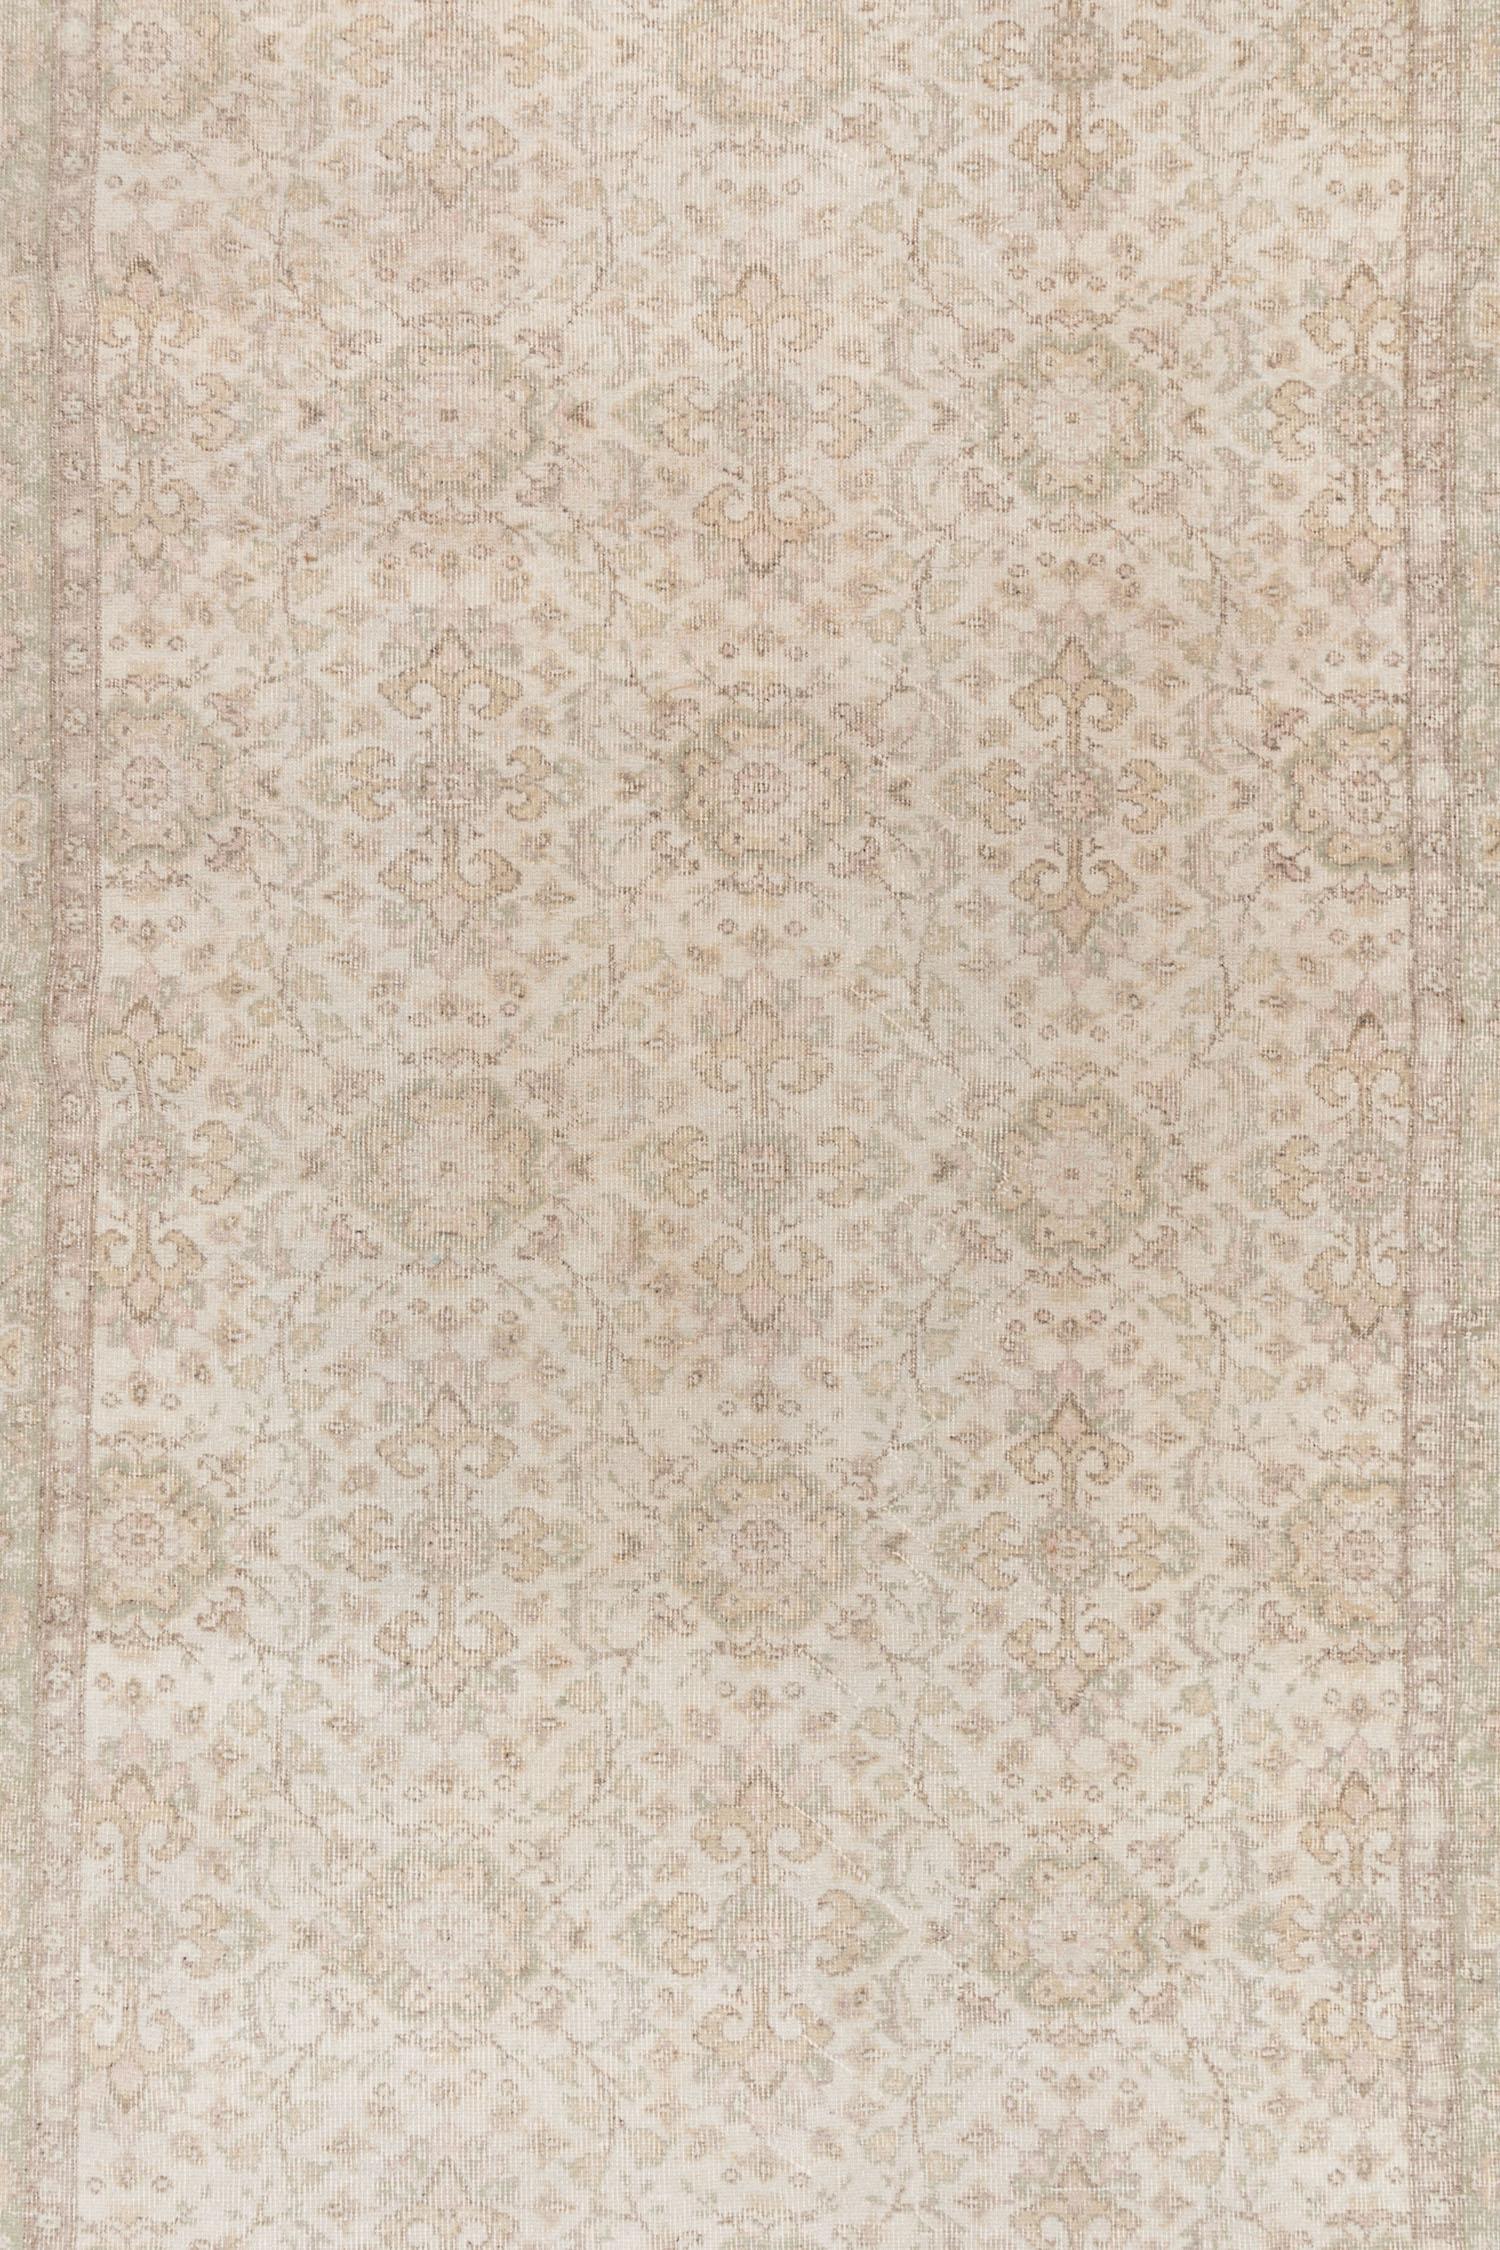 The Turkish Oushak rug is a stunning piece with a warm neutral color palette that adds a cozy and inviting touch to any space. Its subtle all-over pattern adds depth and texture without overpowering the overall design. The rug is meticulously